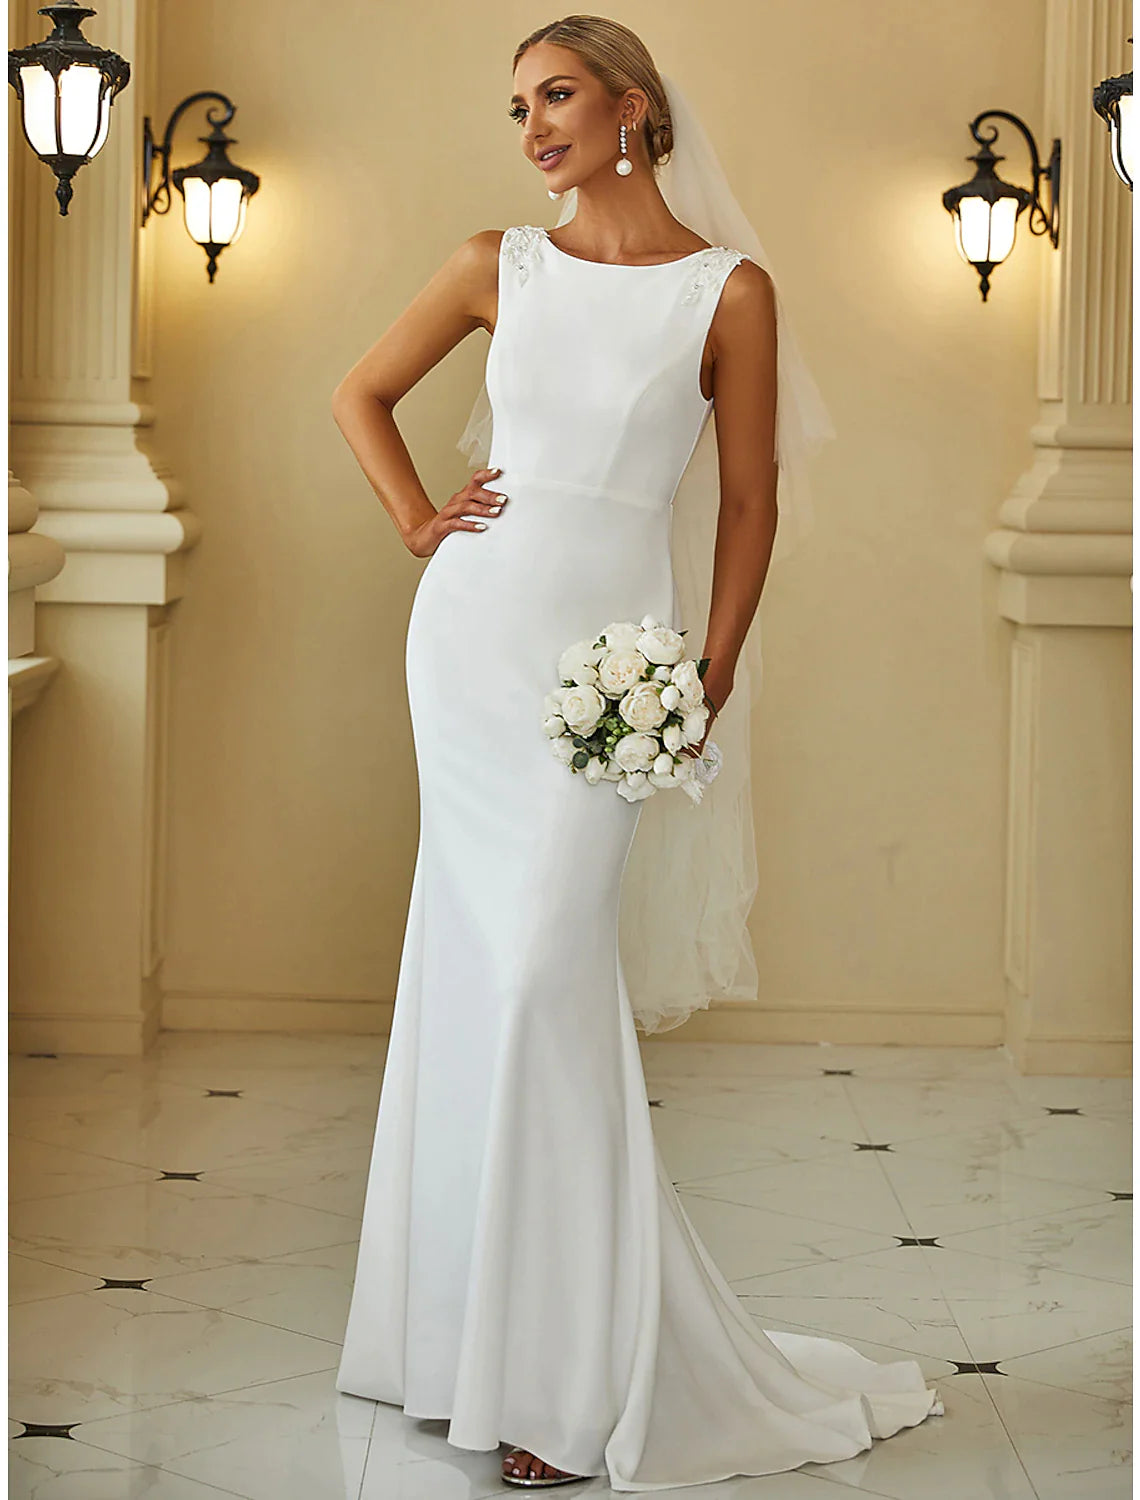 Reception Casual Wedding Dresses Mermaid / Trumpet Scoop Neck Sleeveless Sweep / Brush Train Stretch Fabric Bridal Gowns With Beading Solid Color